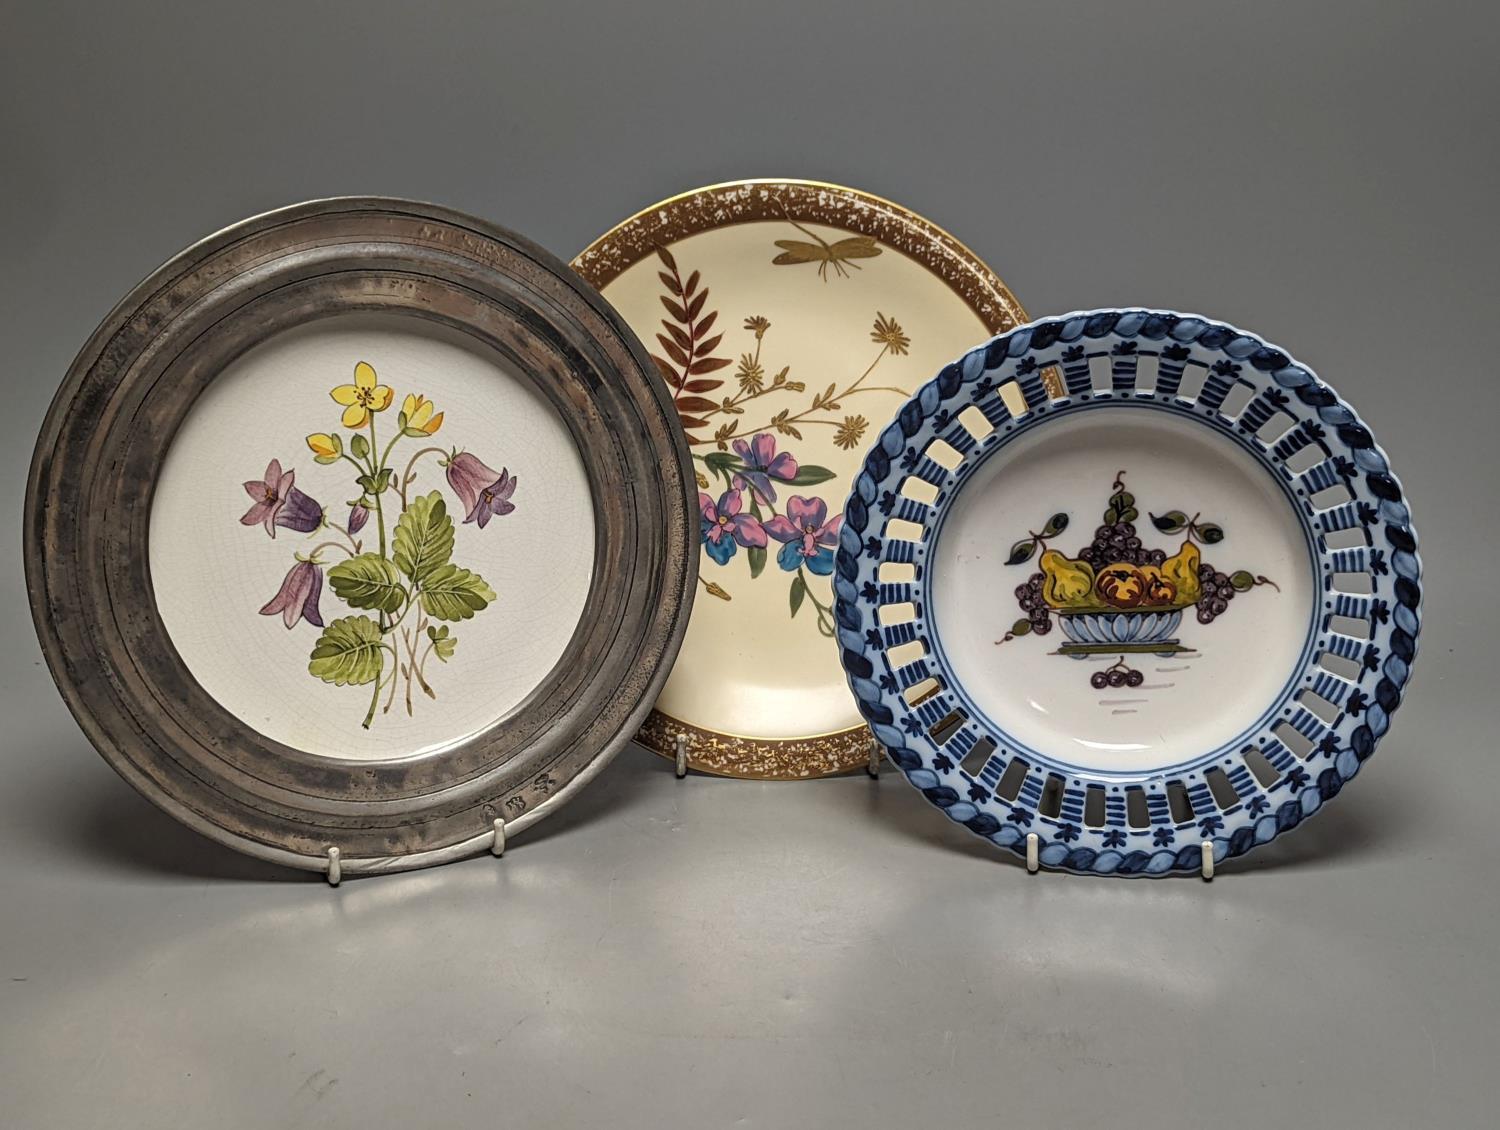 A collection of french pewter and ceramic plates, a set of Dutch fruit plates and a 2 part dessert